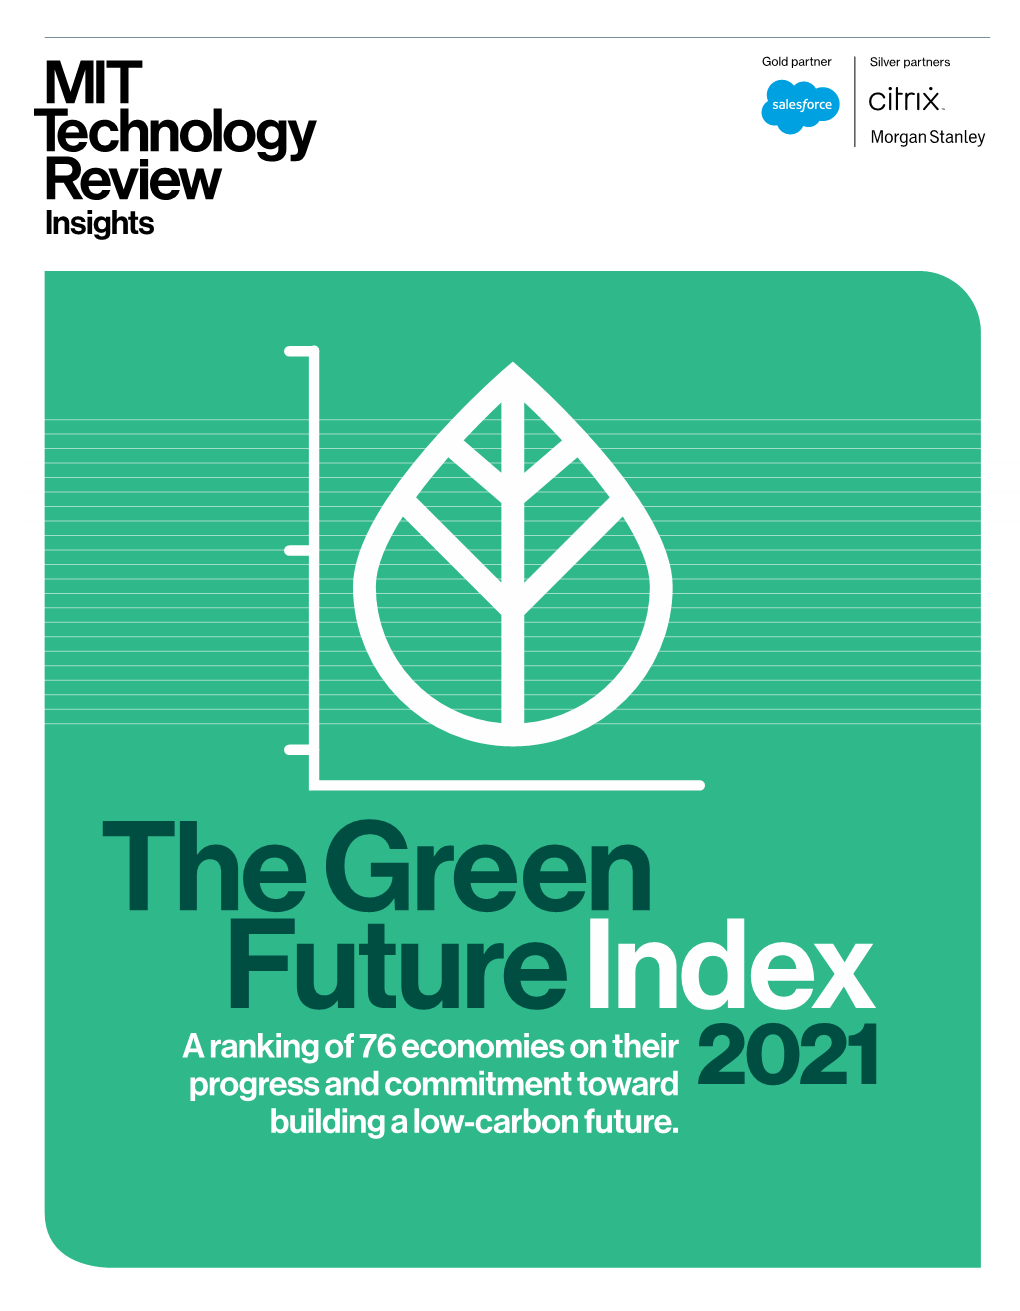 The Green Future Index a Ranking of 76 Economies on Their Progress and Commitment Toward 2021 Building a Low-Carbon Future